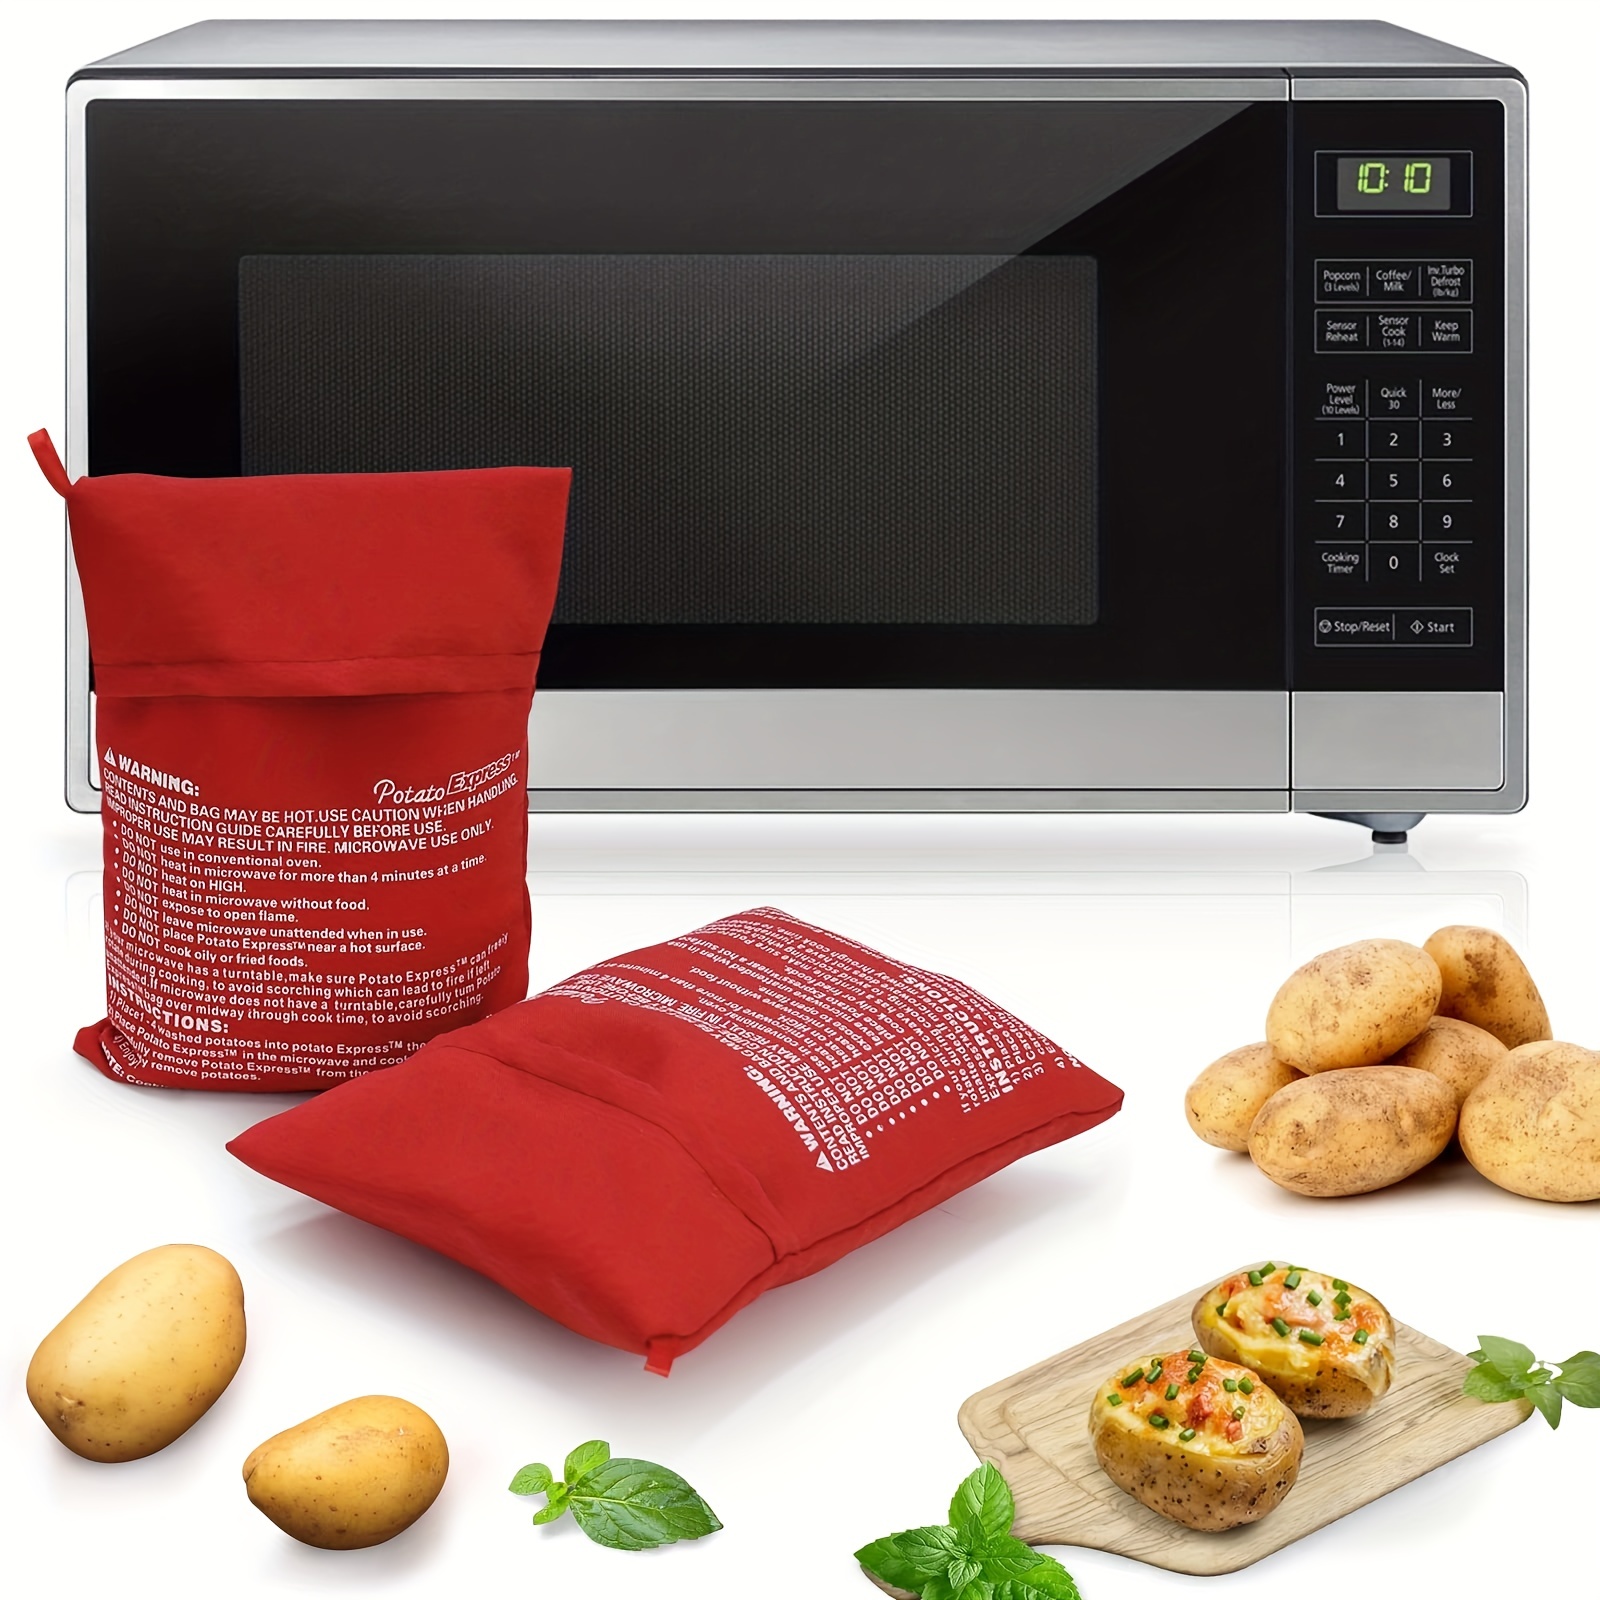 Yummy Can Potatoes Review: As Seen on TV Microwave Potato Cooker